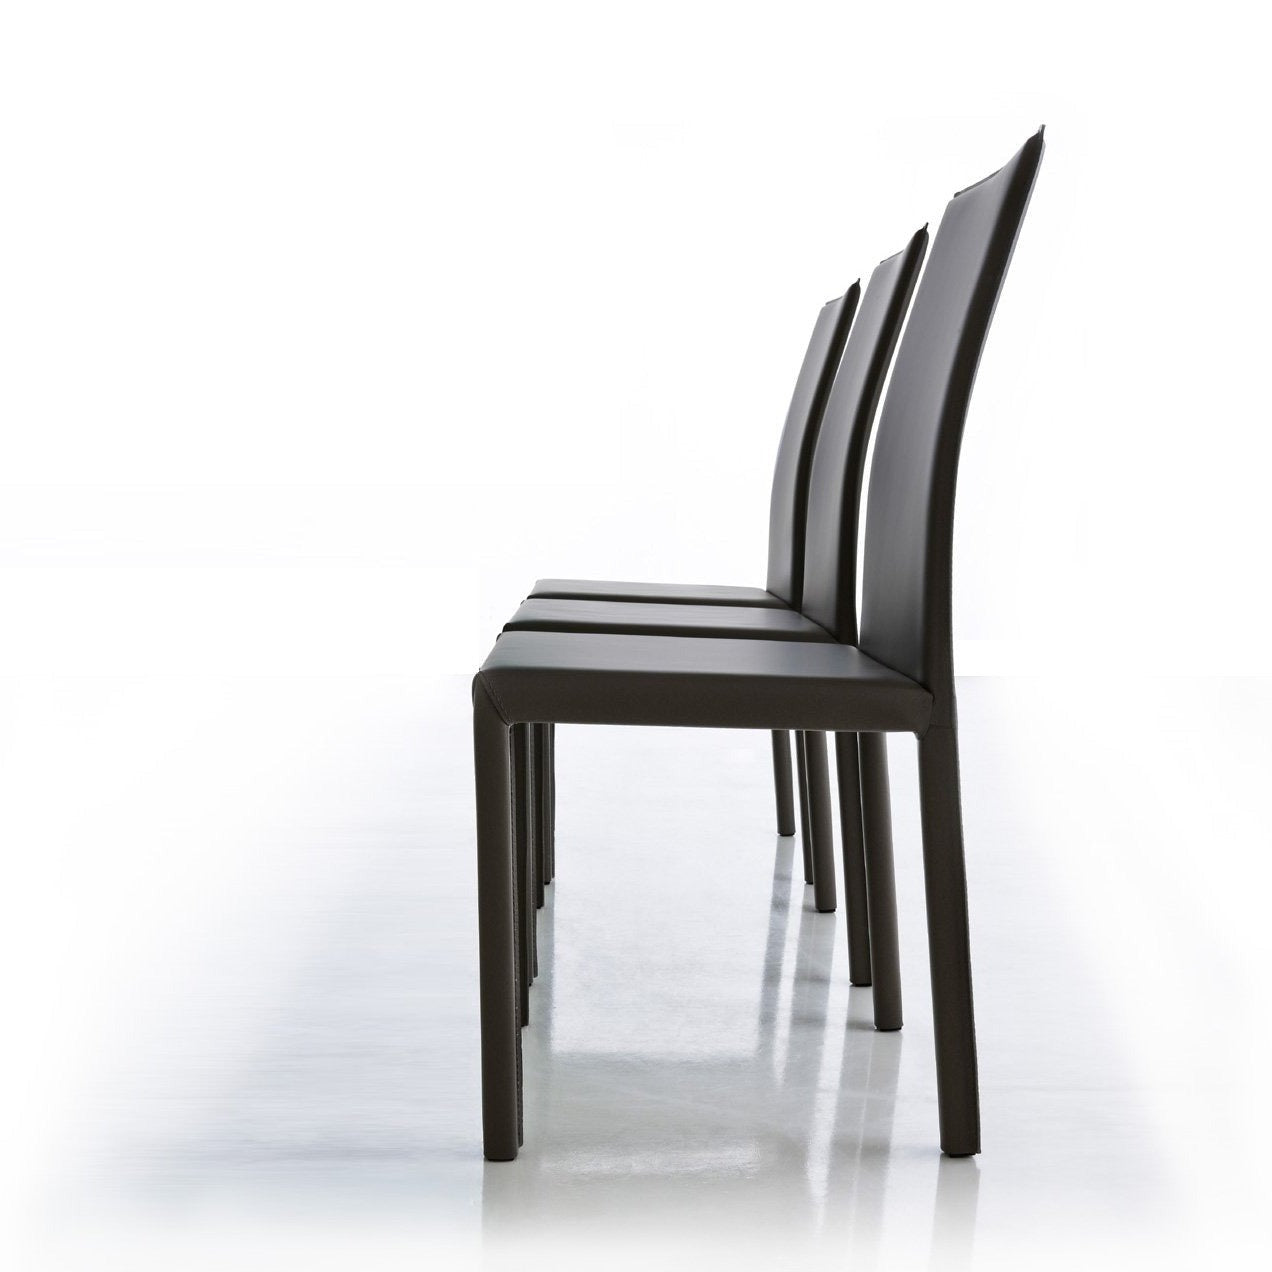 Romina upholstered dining chair by Compar